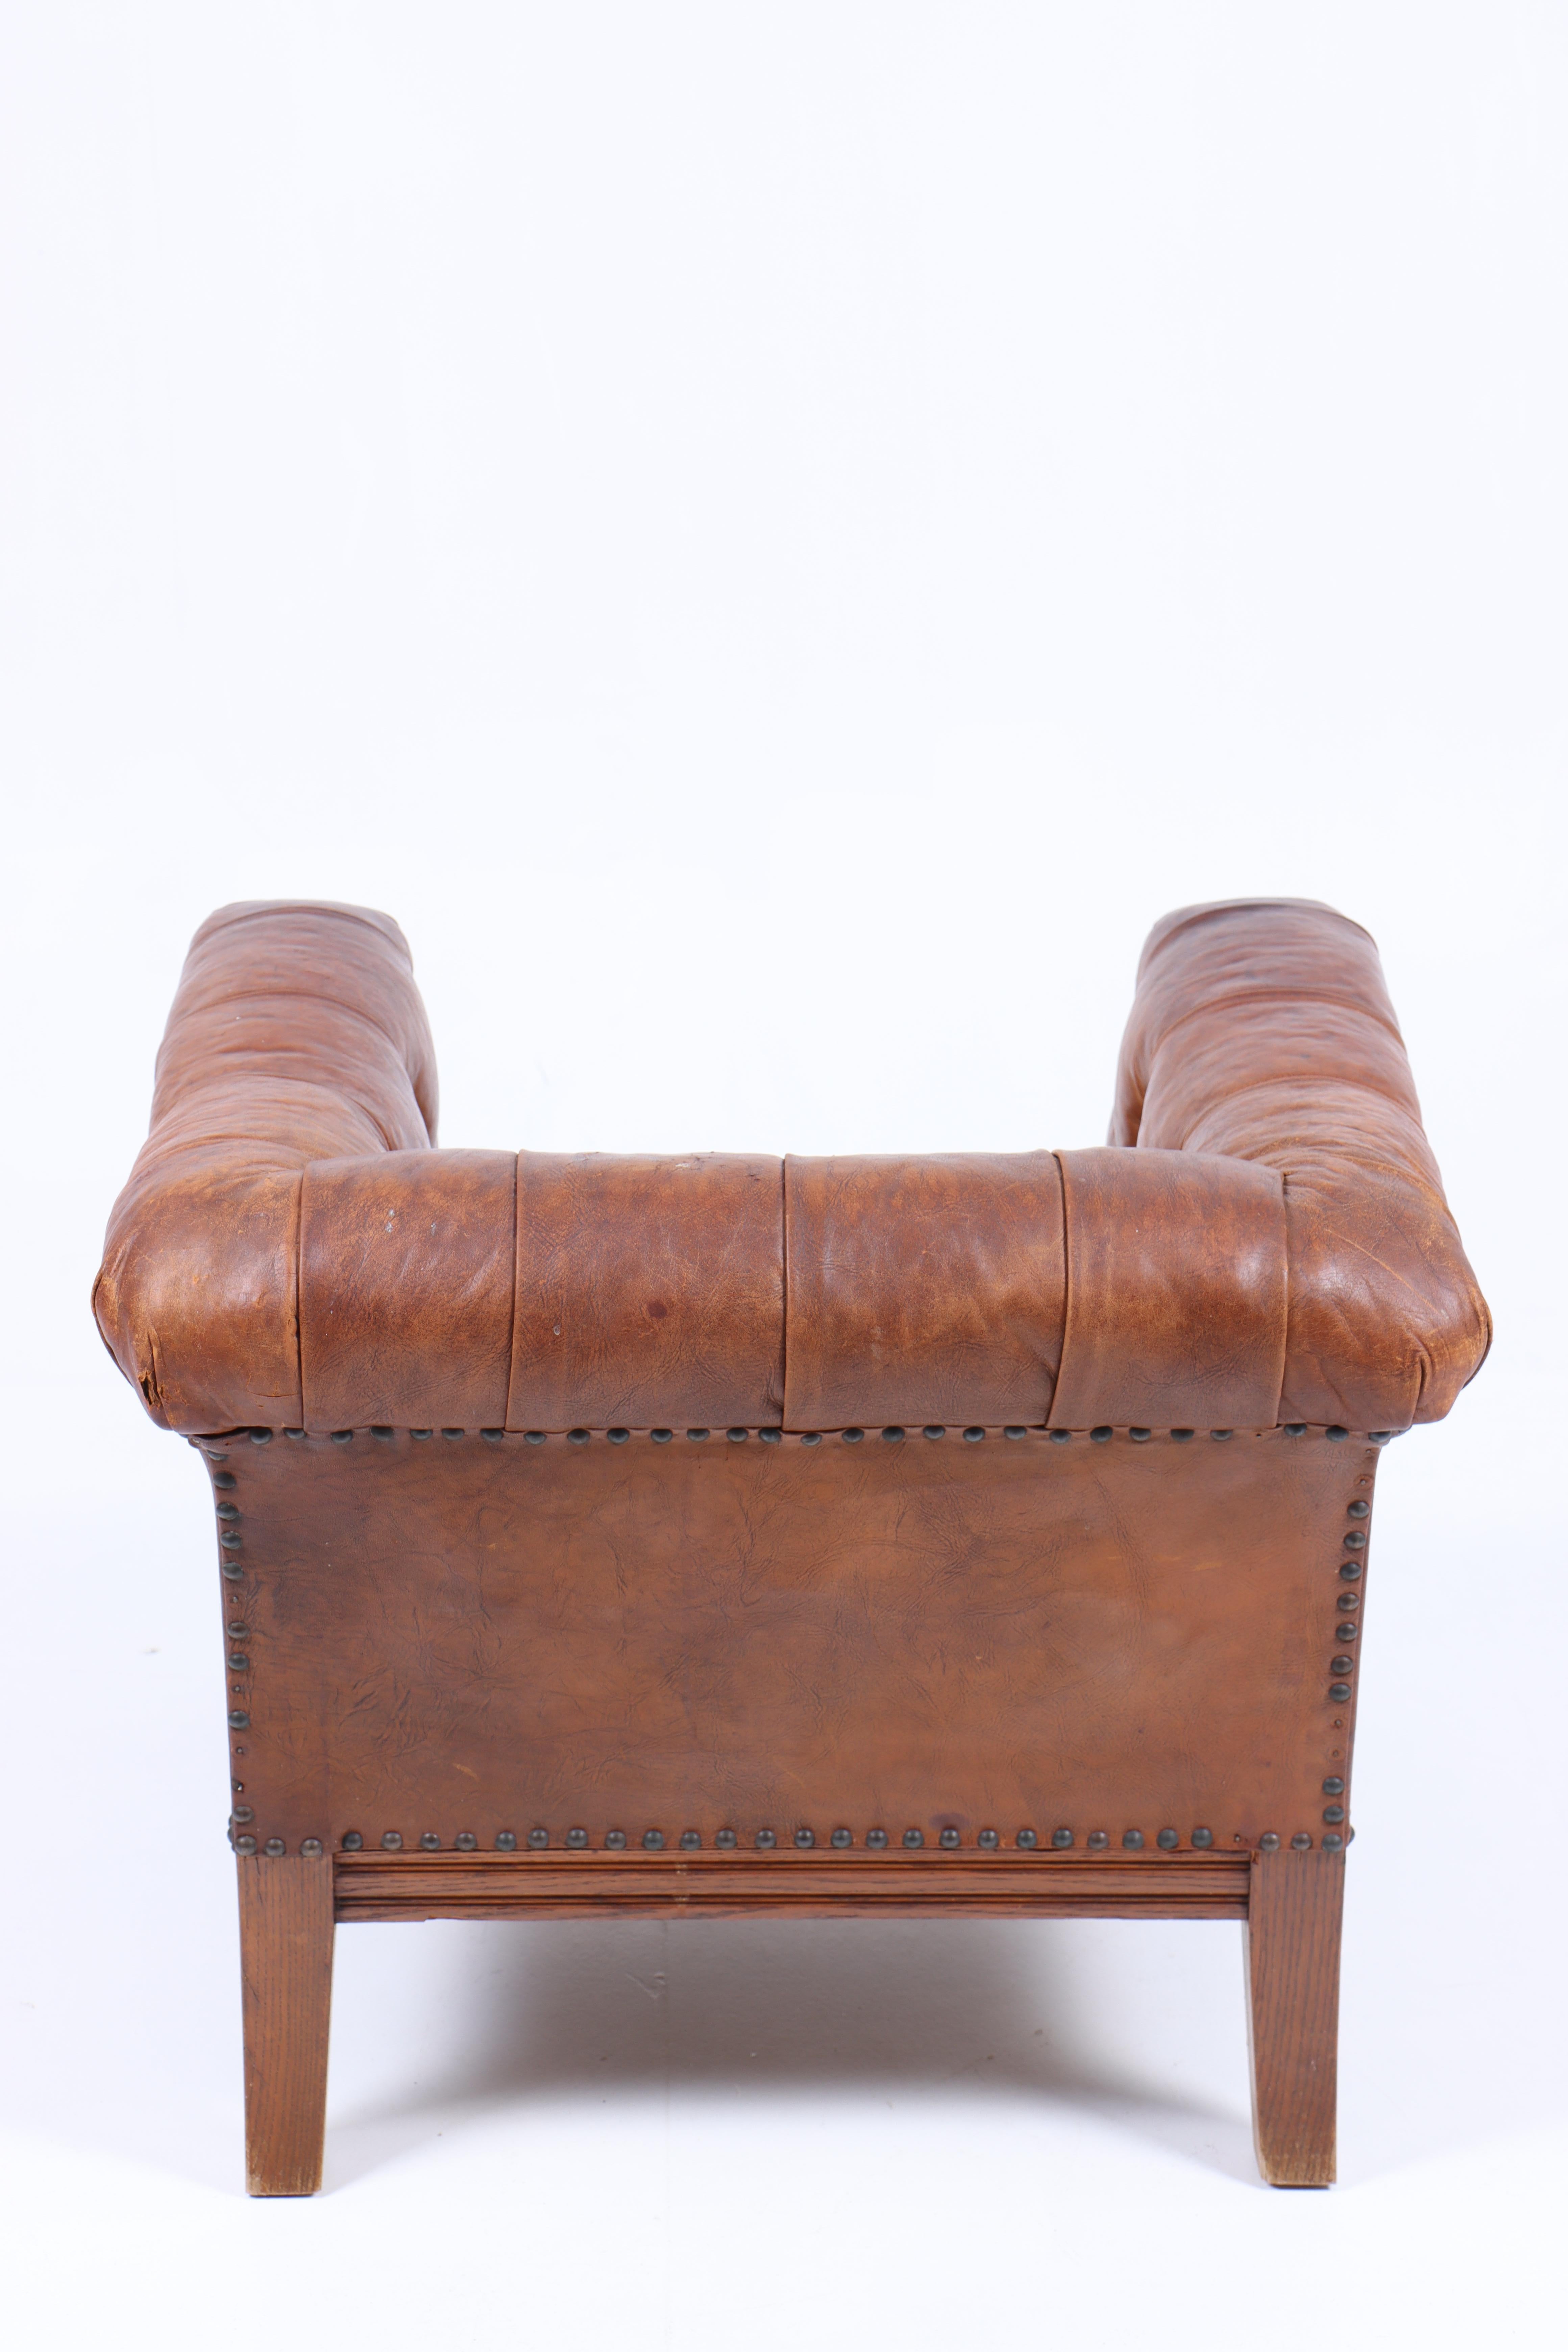 Lounge Chair in Patinated Leather, Made in Denmark, 1940s For Sale 1